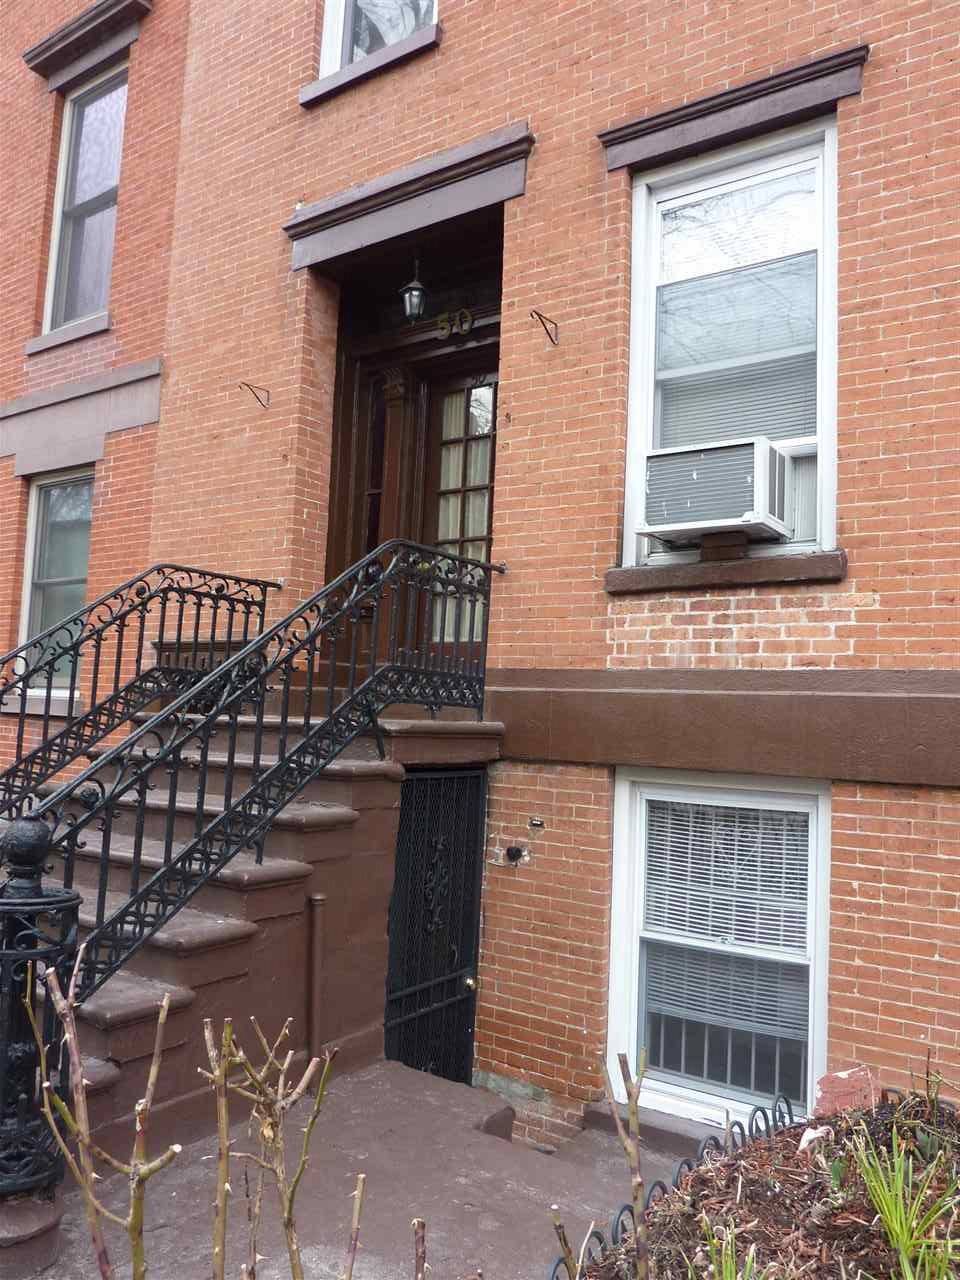 Cozy studio apartment in historic brownstone between Van Vorst Park and Grove PATH station--and steps from all that makes Downtown JC great